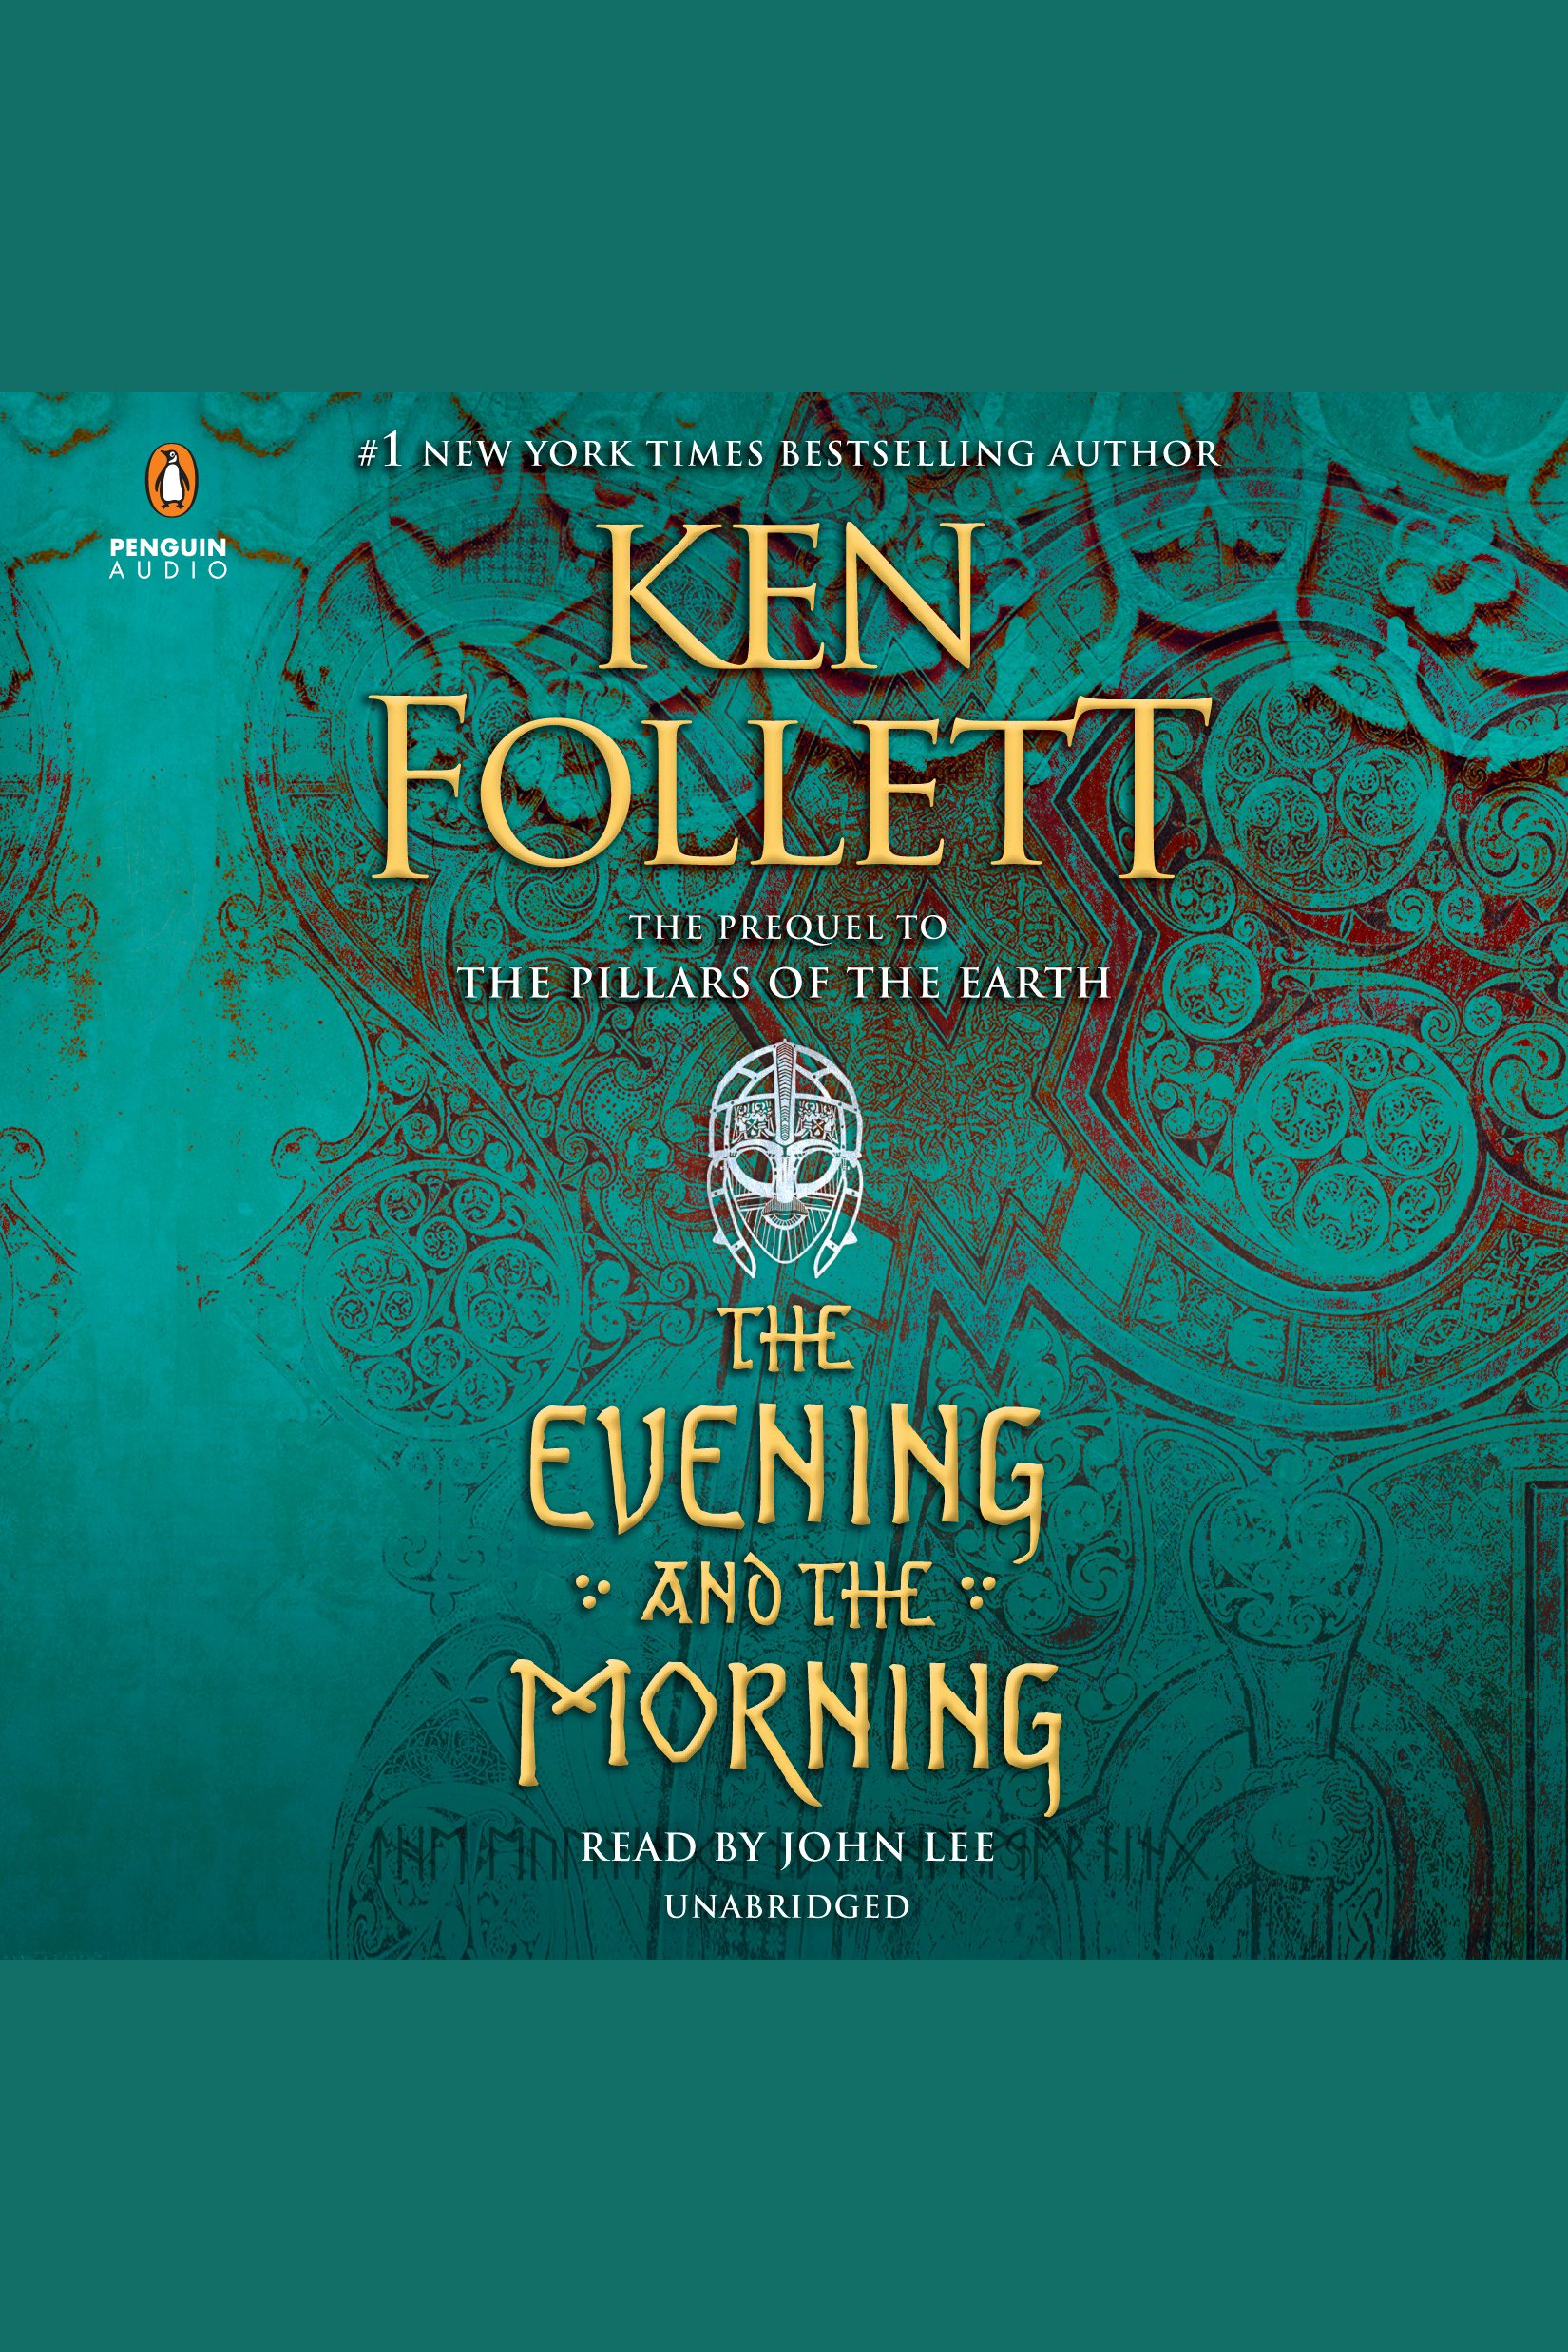 The Evening and the Morning cover image